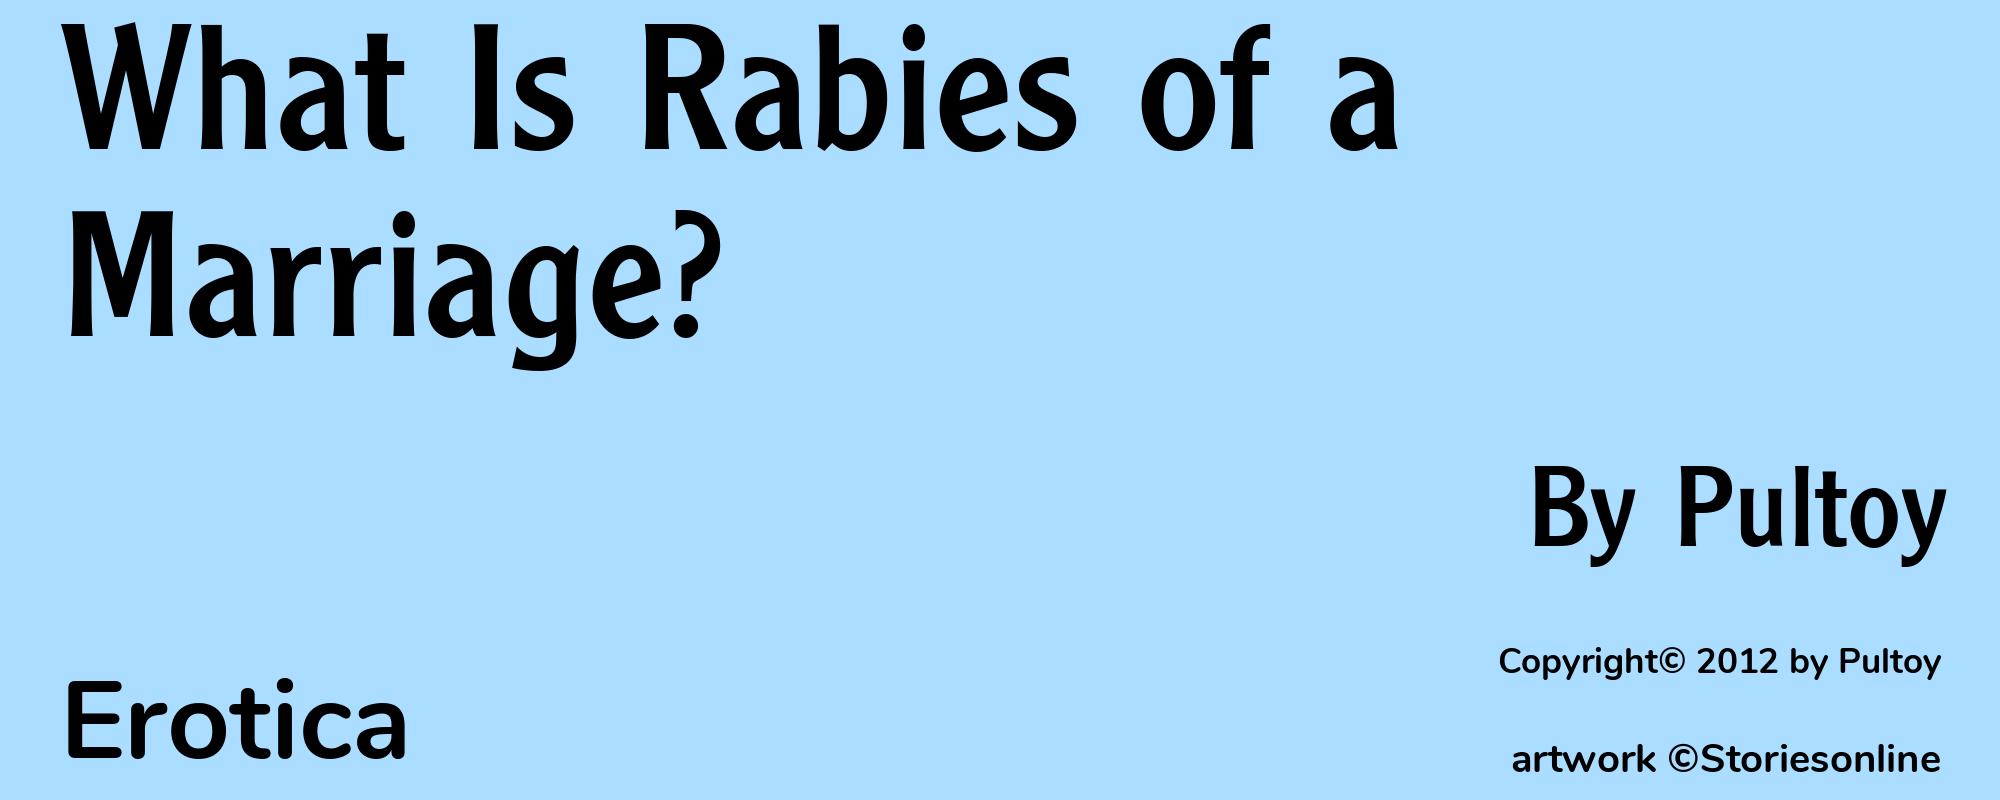 What Is Rabies of a Marriage? - Cover